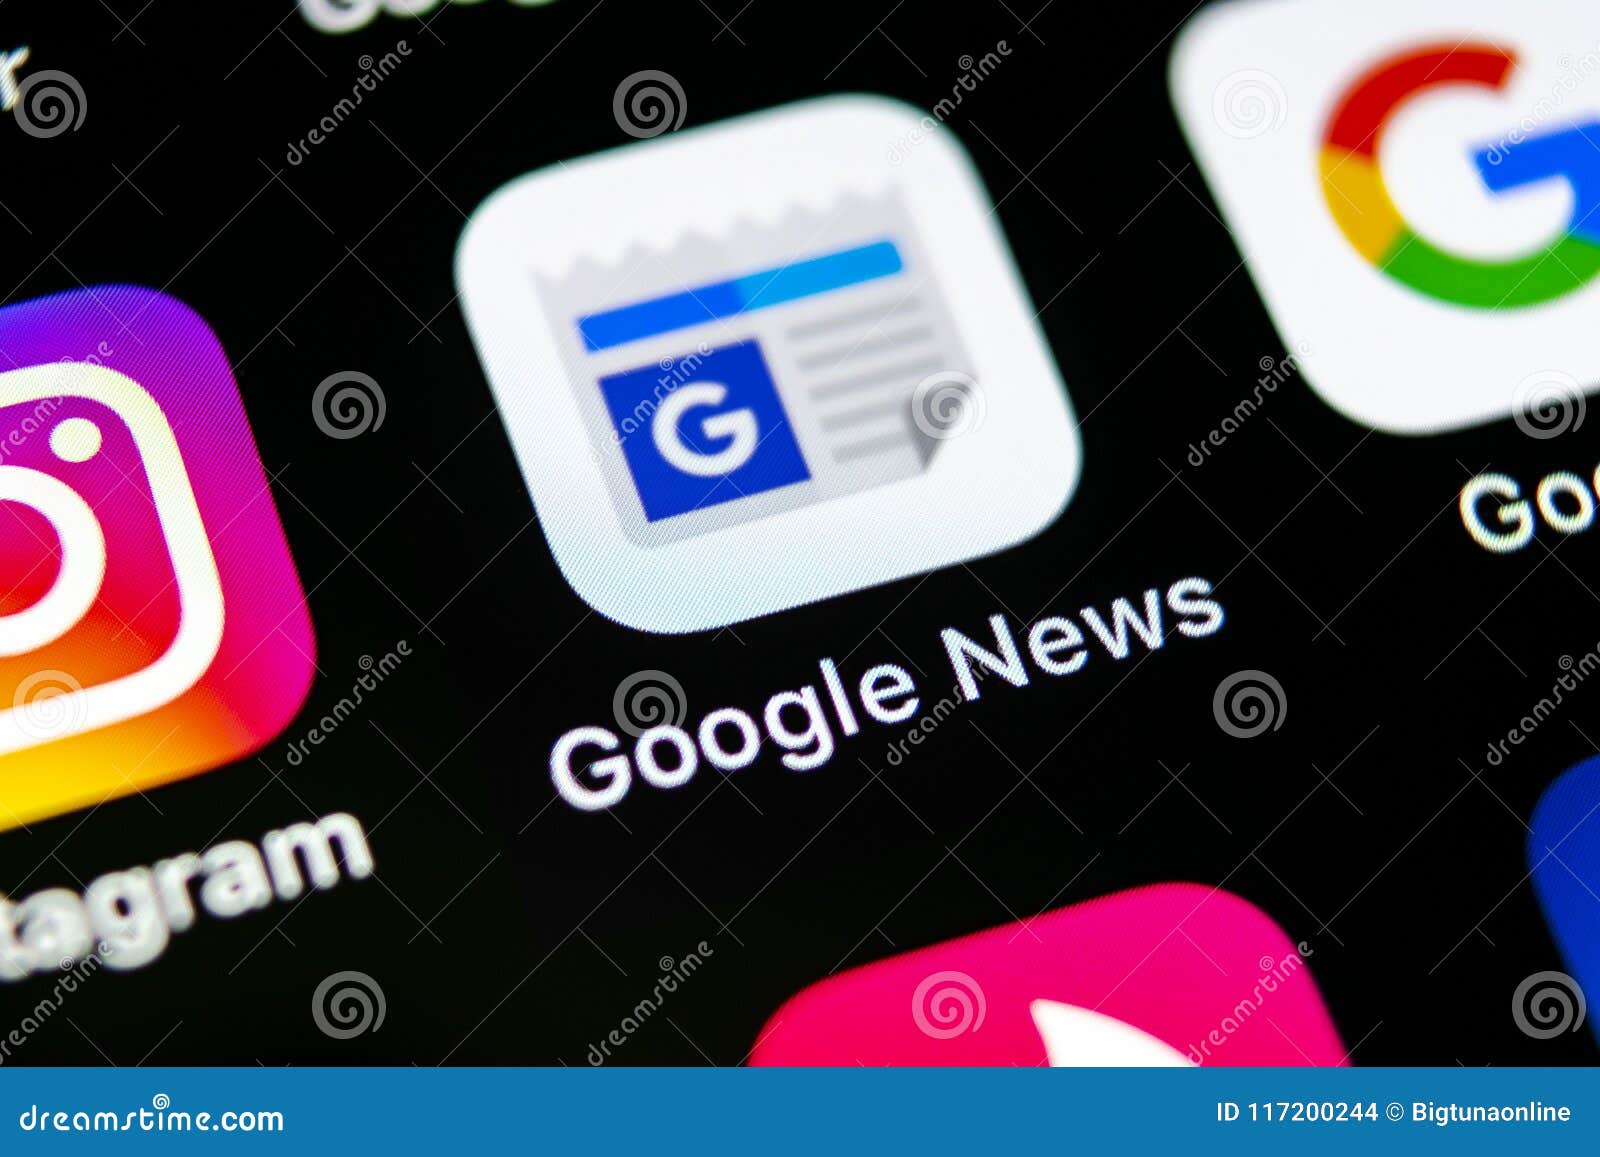 Google News Application Icon On Apple Iphone X Smartphone Screen Close-Up.  Google News App Icon. Social Network Editorial Stock Image - Image Of  Digital, News: 117200244